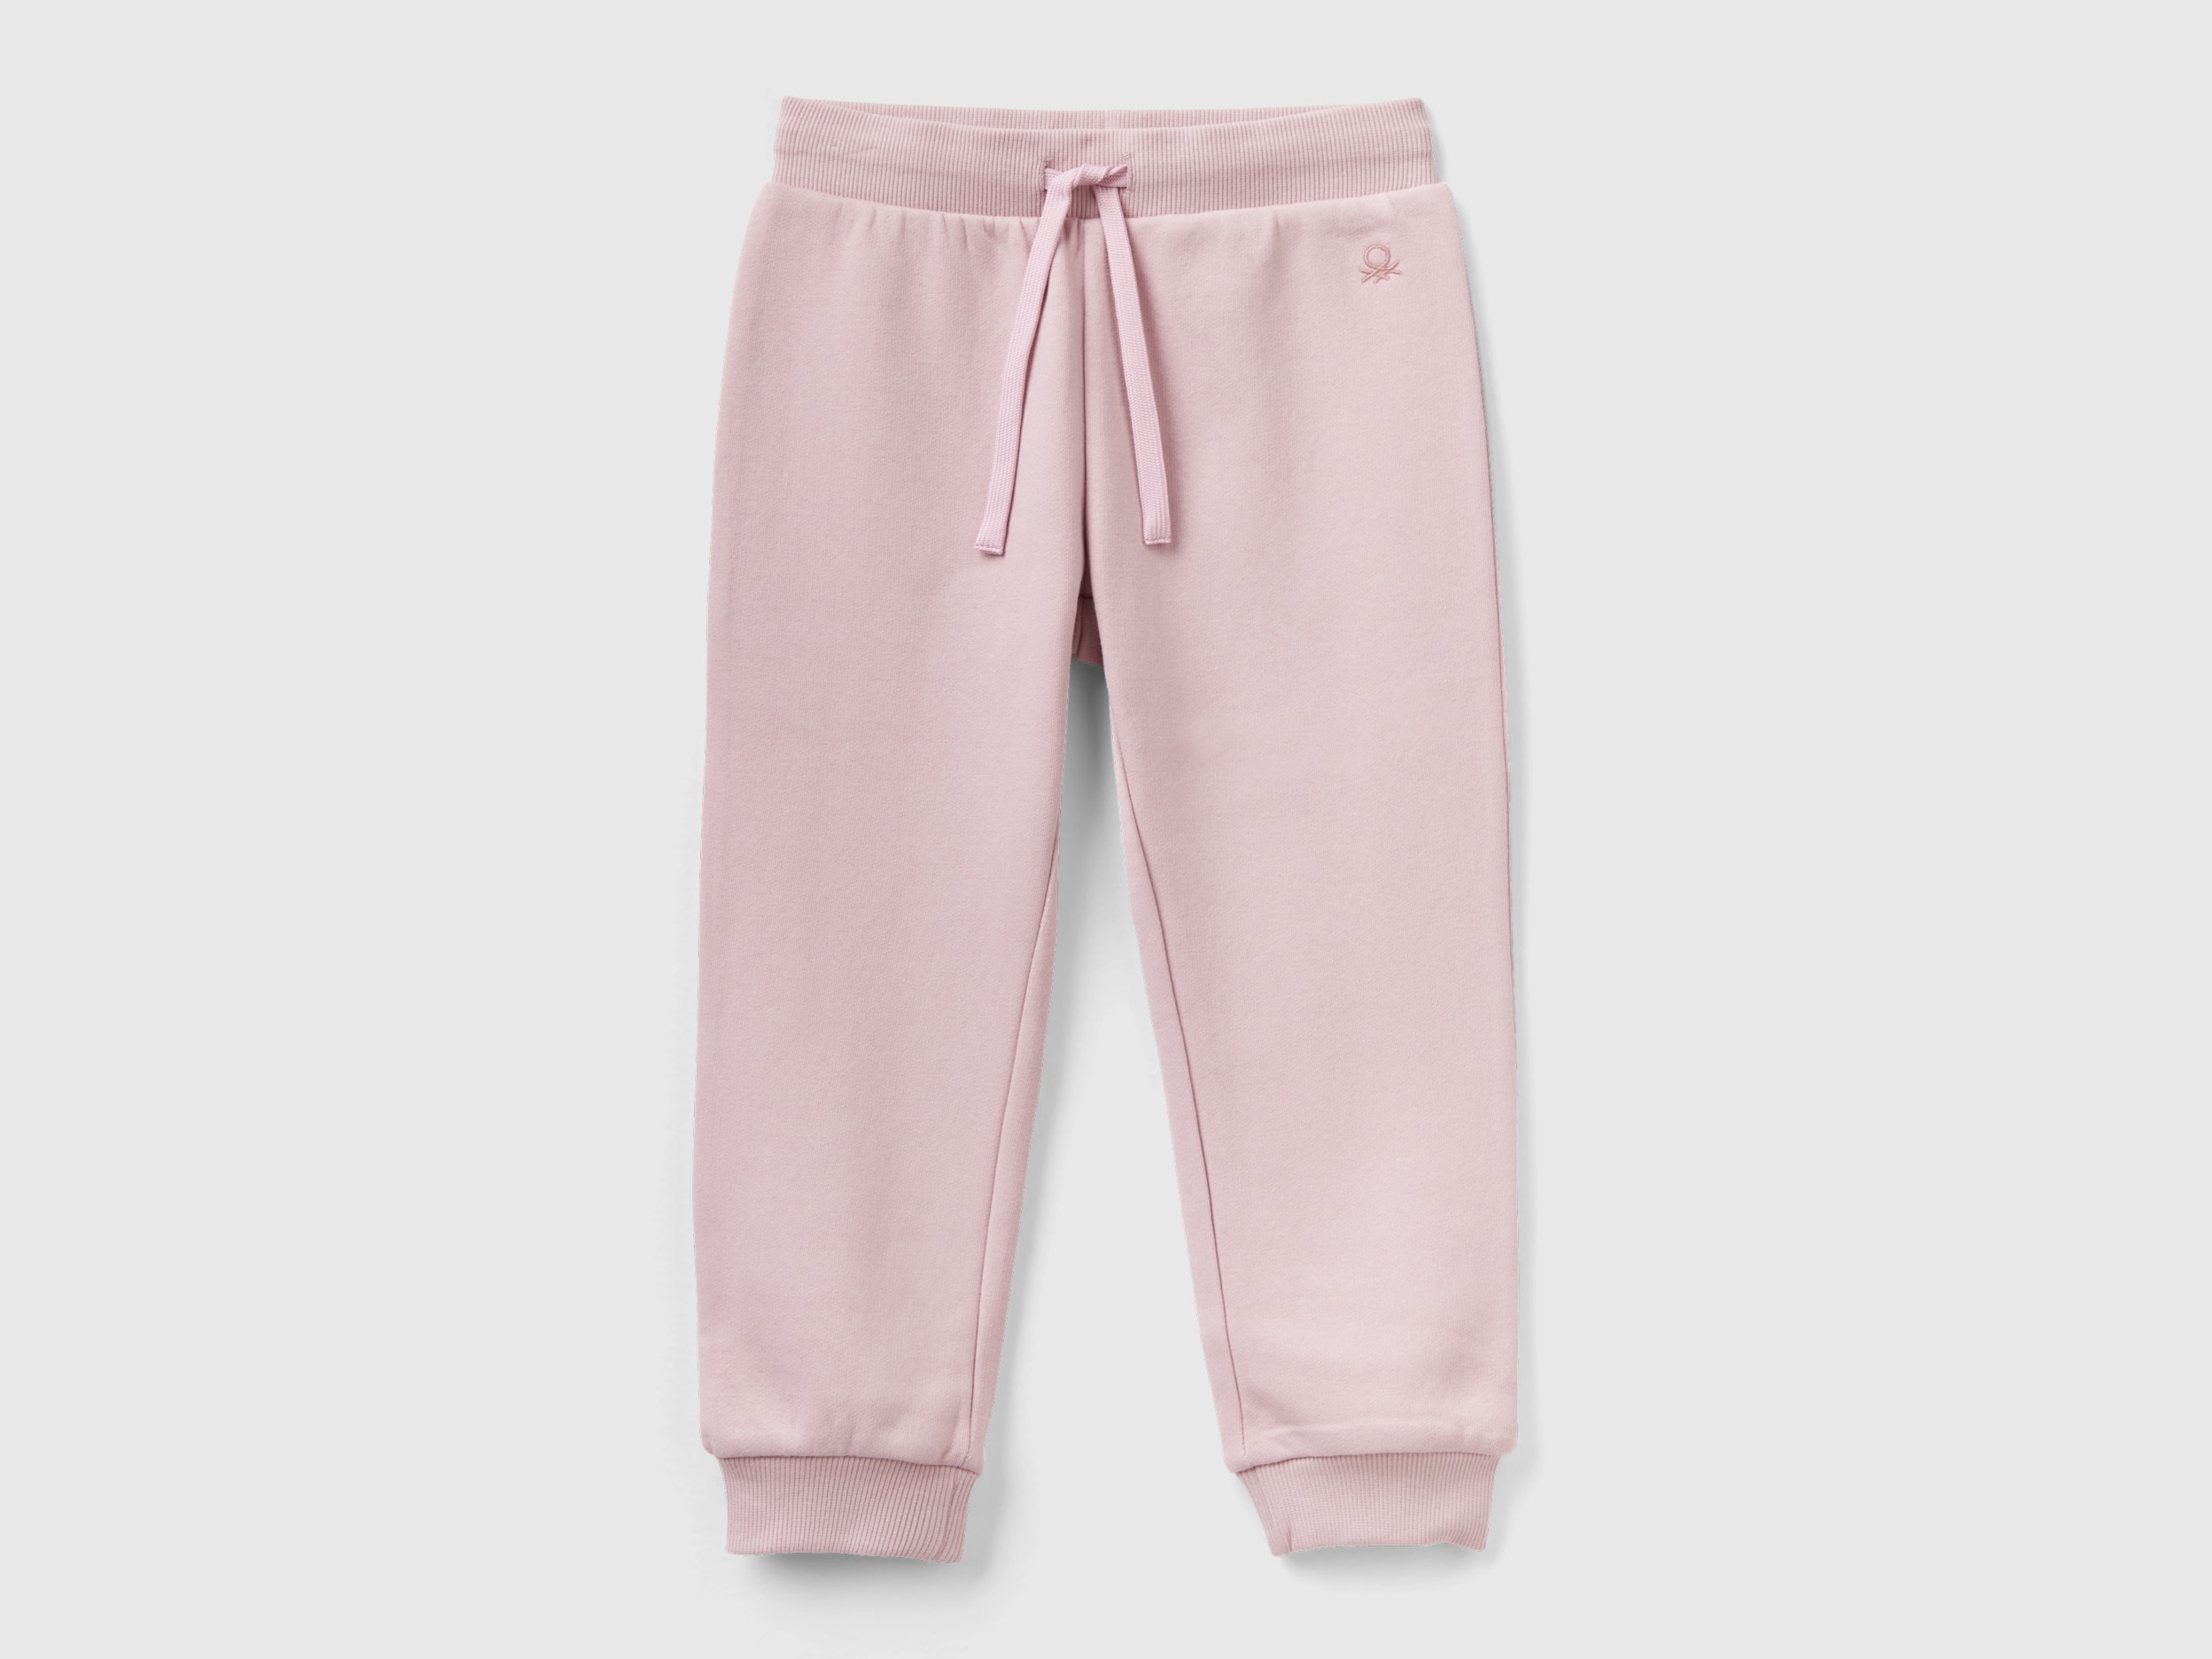 Benetton, Sweat Joggers With Drawstring, size 12-18, Pink, Kids